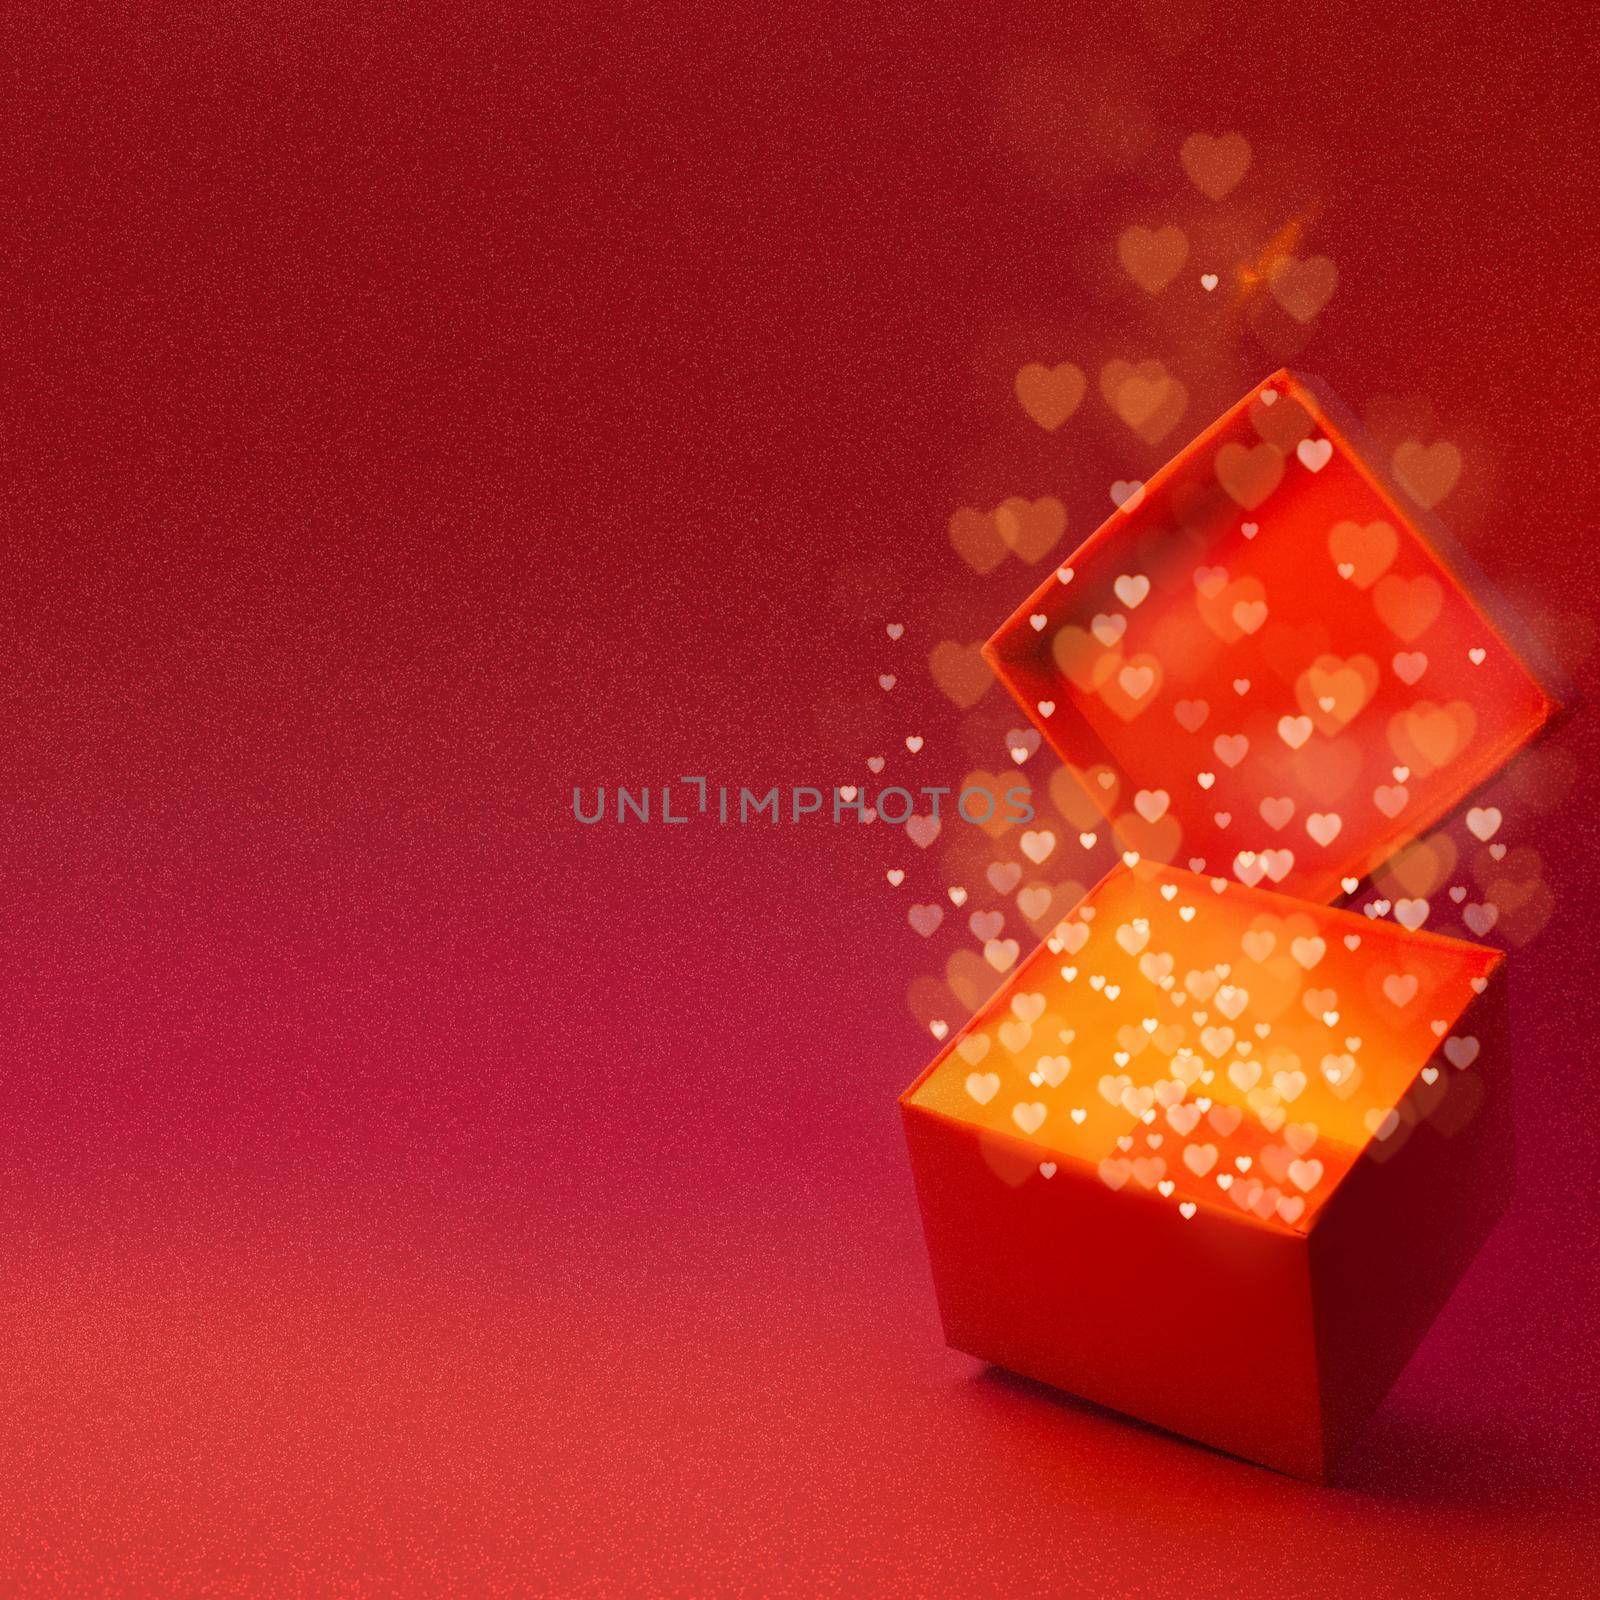 Magic box with love gift for Valentines day, pink red glowing with light from inside with bokeh hearts on glitter background with copy space for text